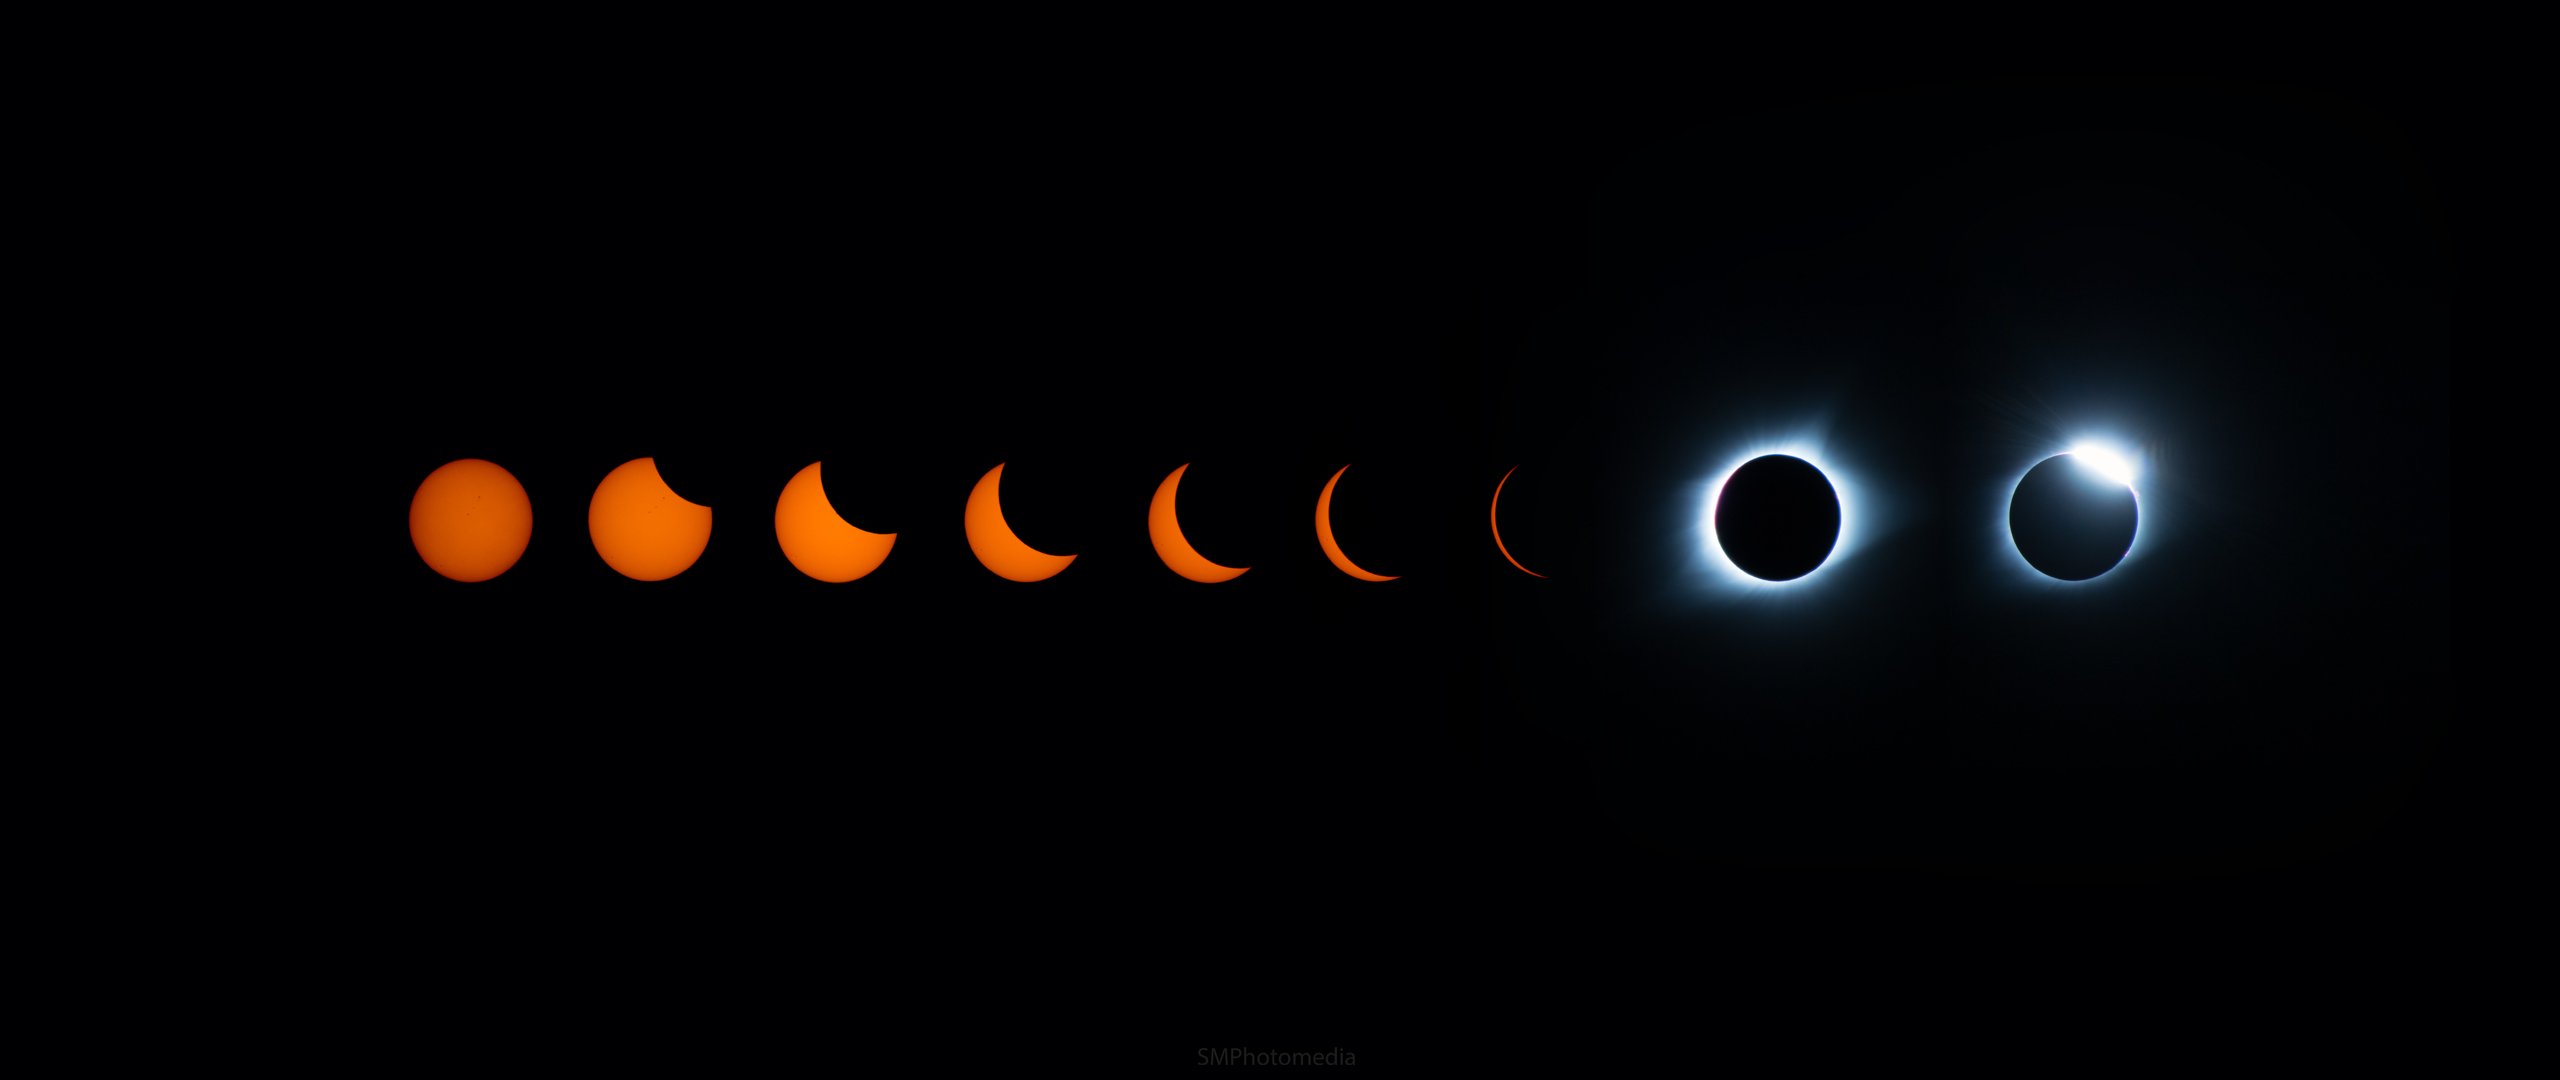 Of Eclipse 4k Wallpaper For Your Desktop Or Mobile Screen